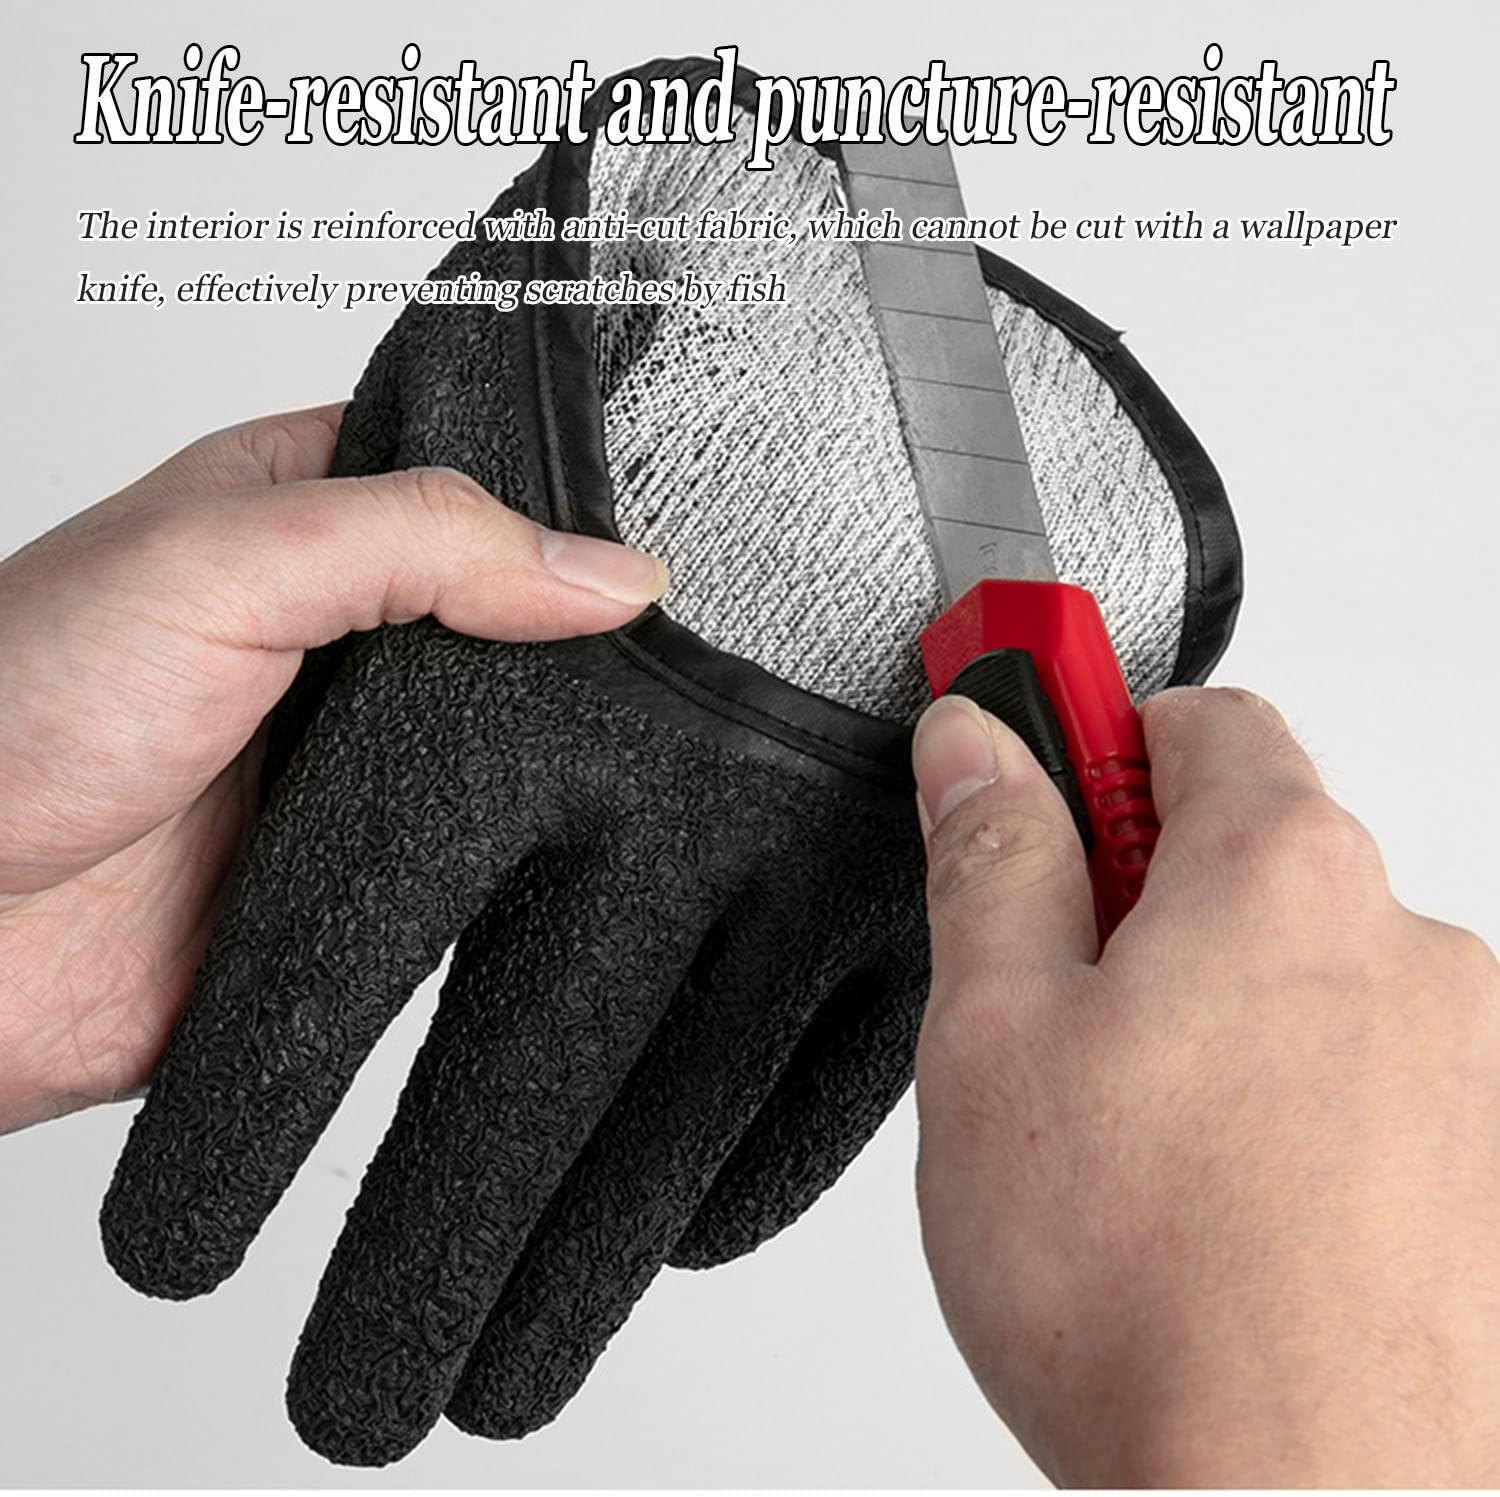 Protect Hand Professional Catch Fish Fishing Catching Gloves Avoid stabbing